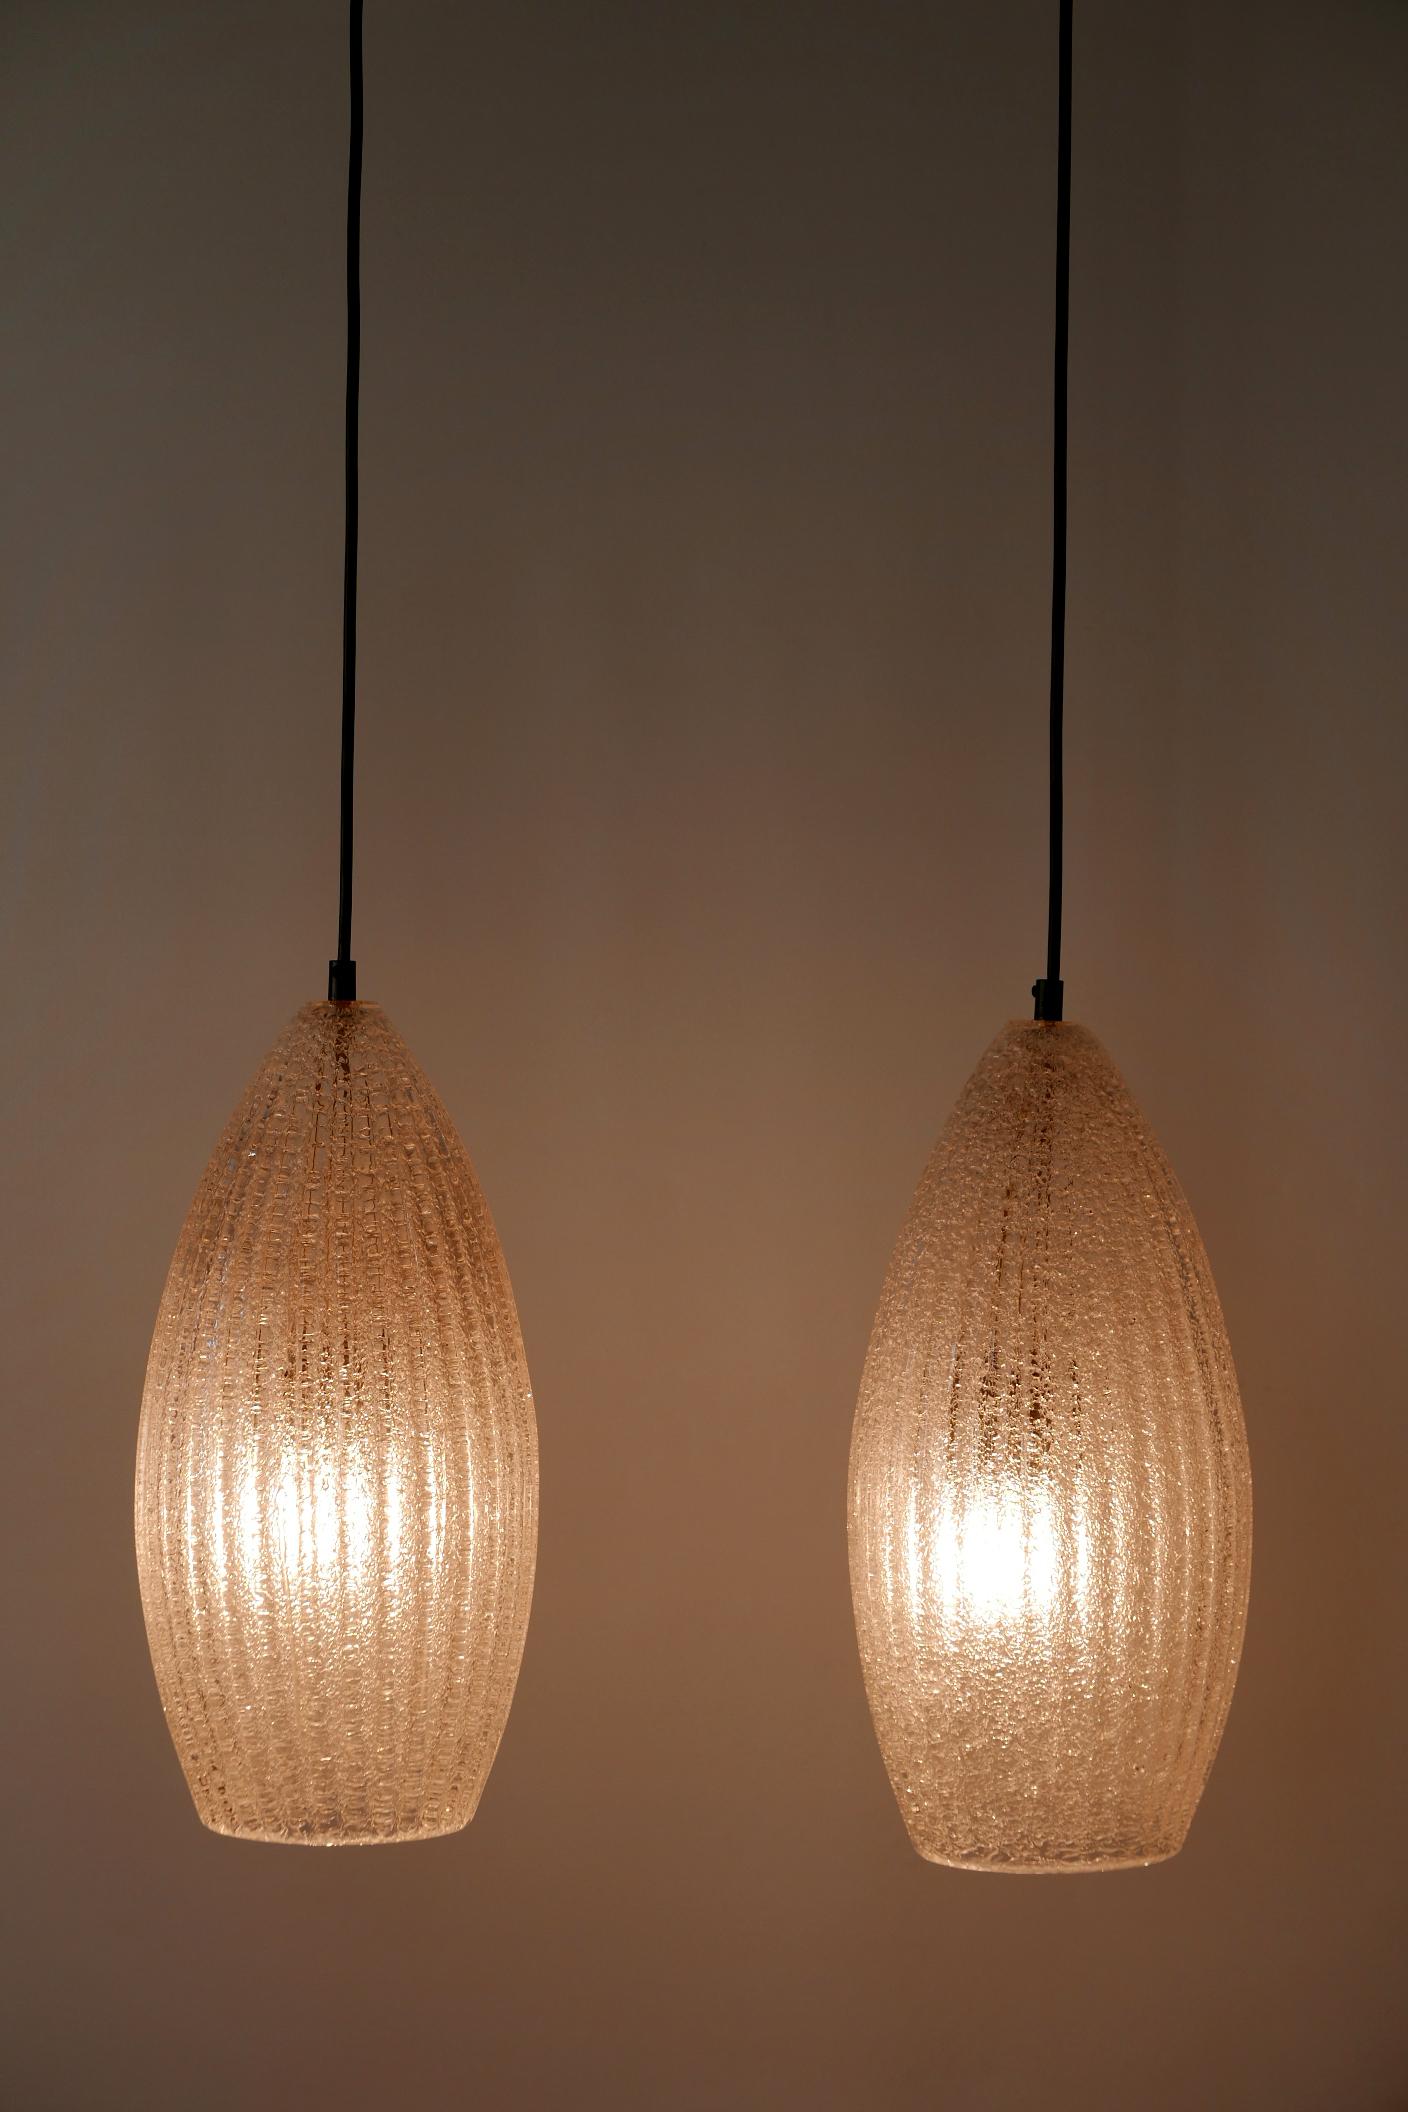 Set of Two Mid-Century Modern Textured Glass Pendant Lamps, 1960s, Germany For Sale 9